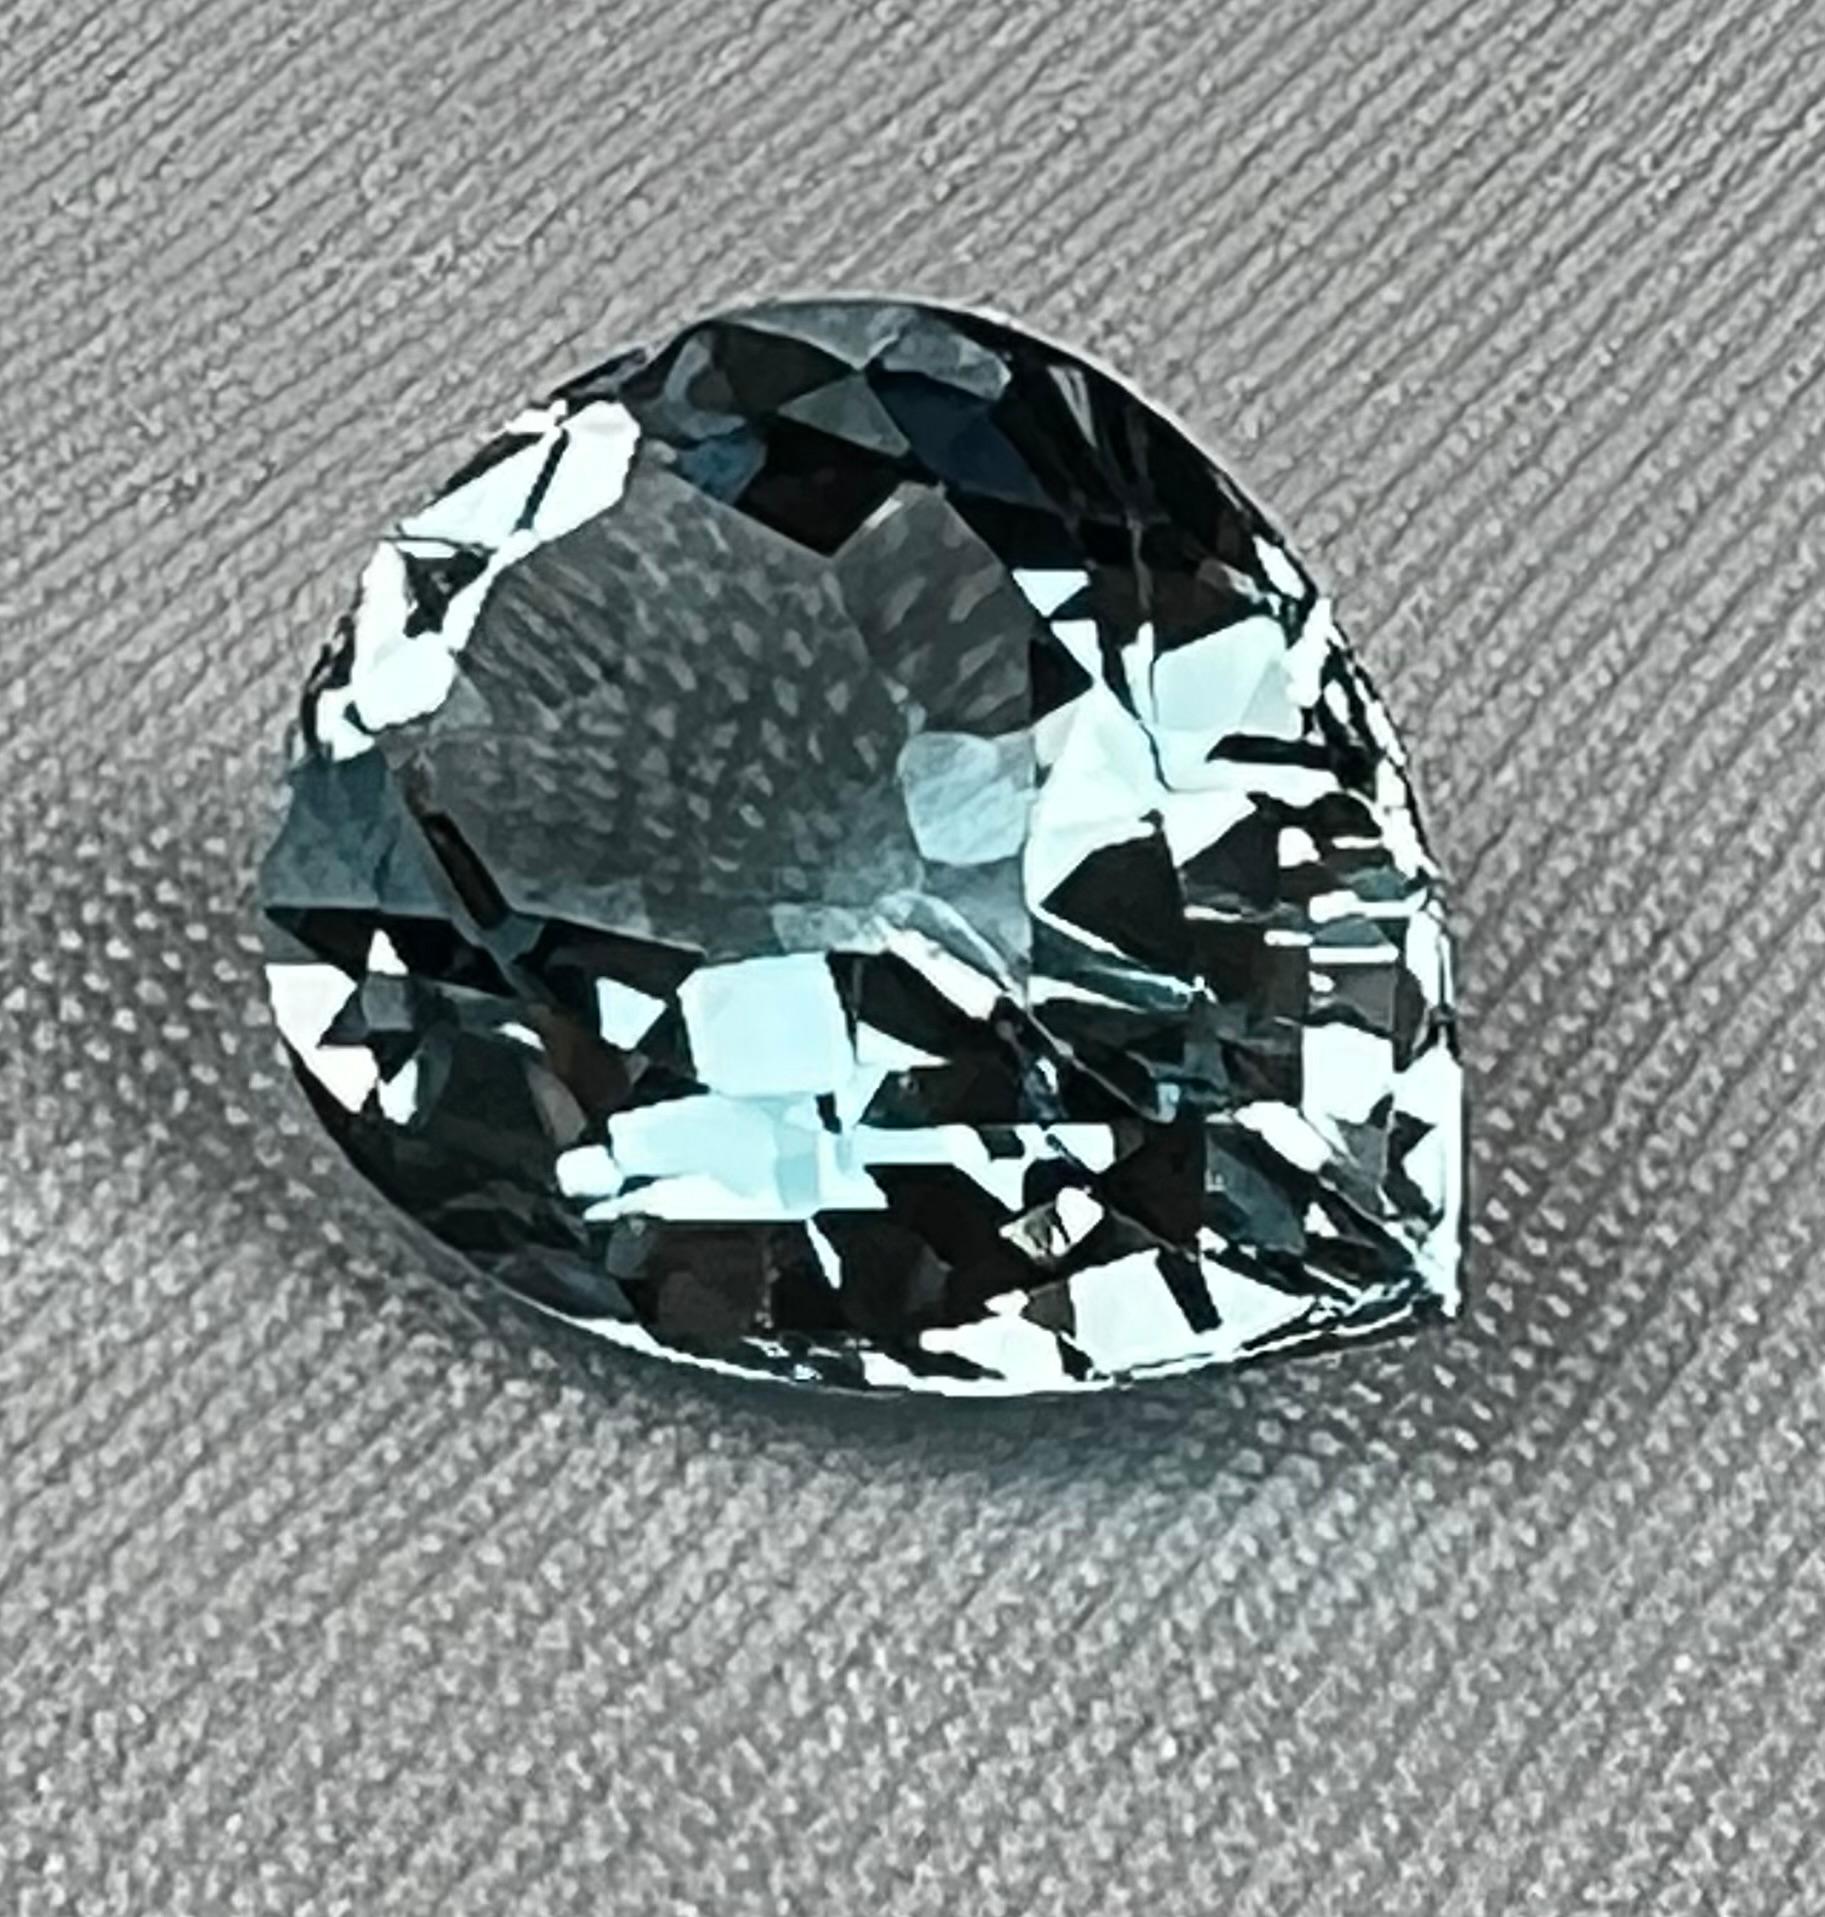 Perfect pear shaped approximately twenty carat blue topaz Brazilian fancy cut stone, sometimes referred to as a tear drop shape.
The legend of origin is marrying a marquise shape with a round brilliant shape resulting in a pear shaped stone.  This